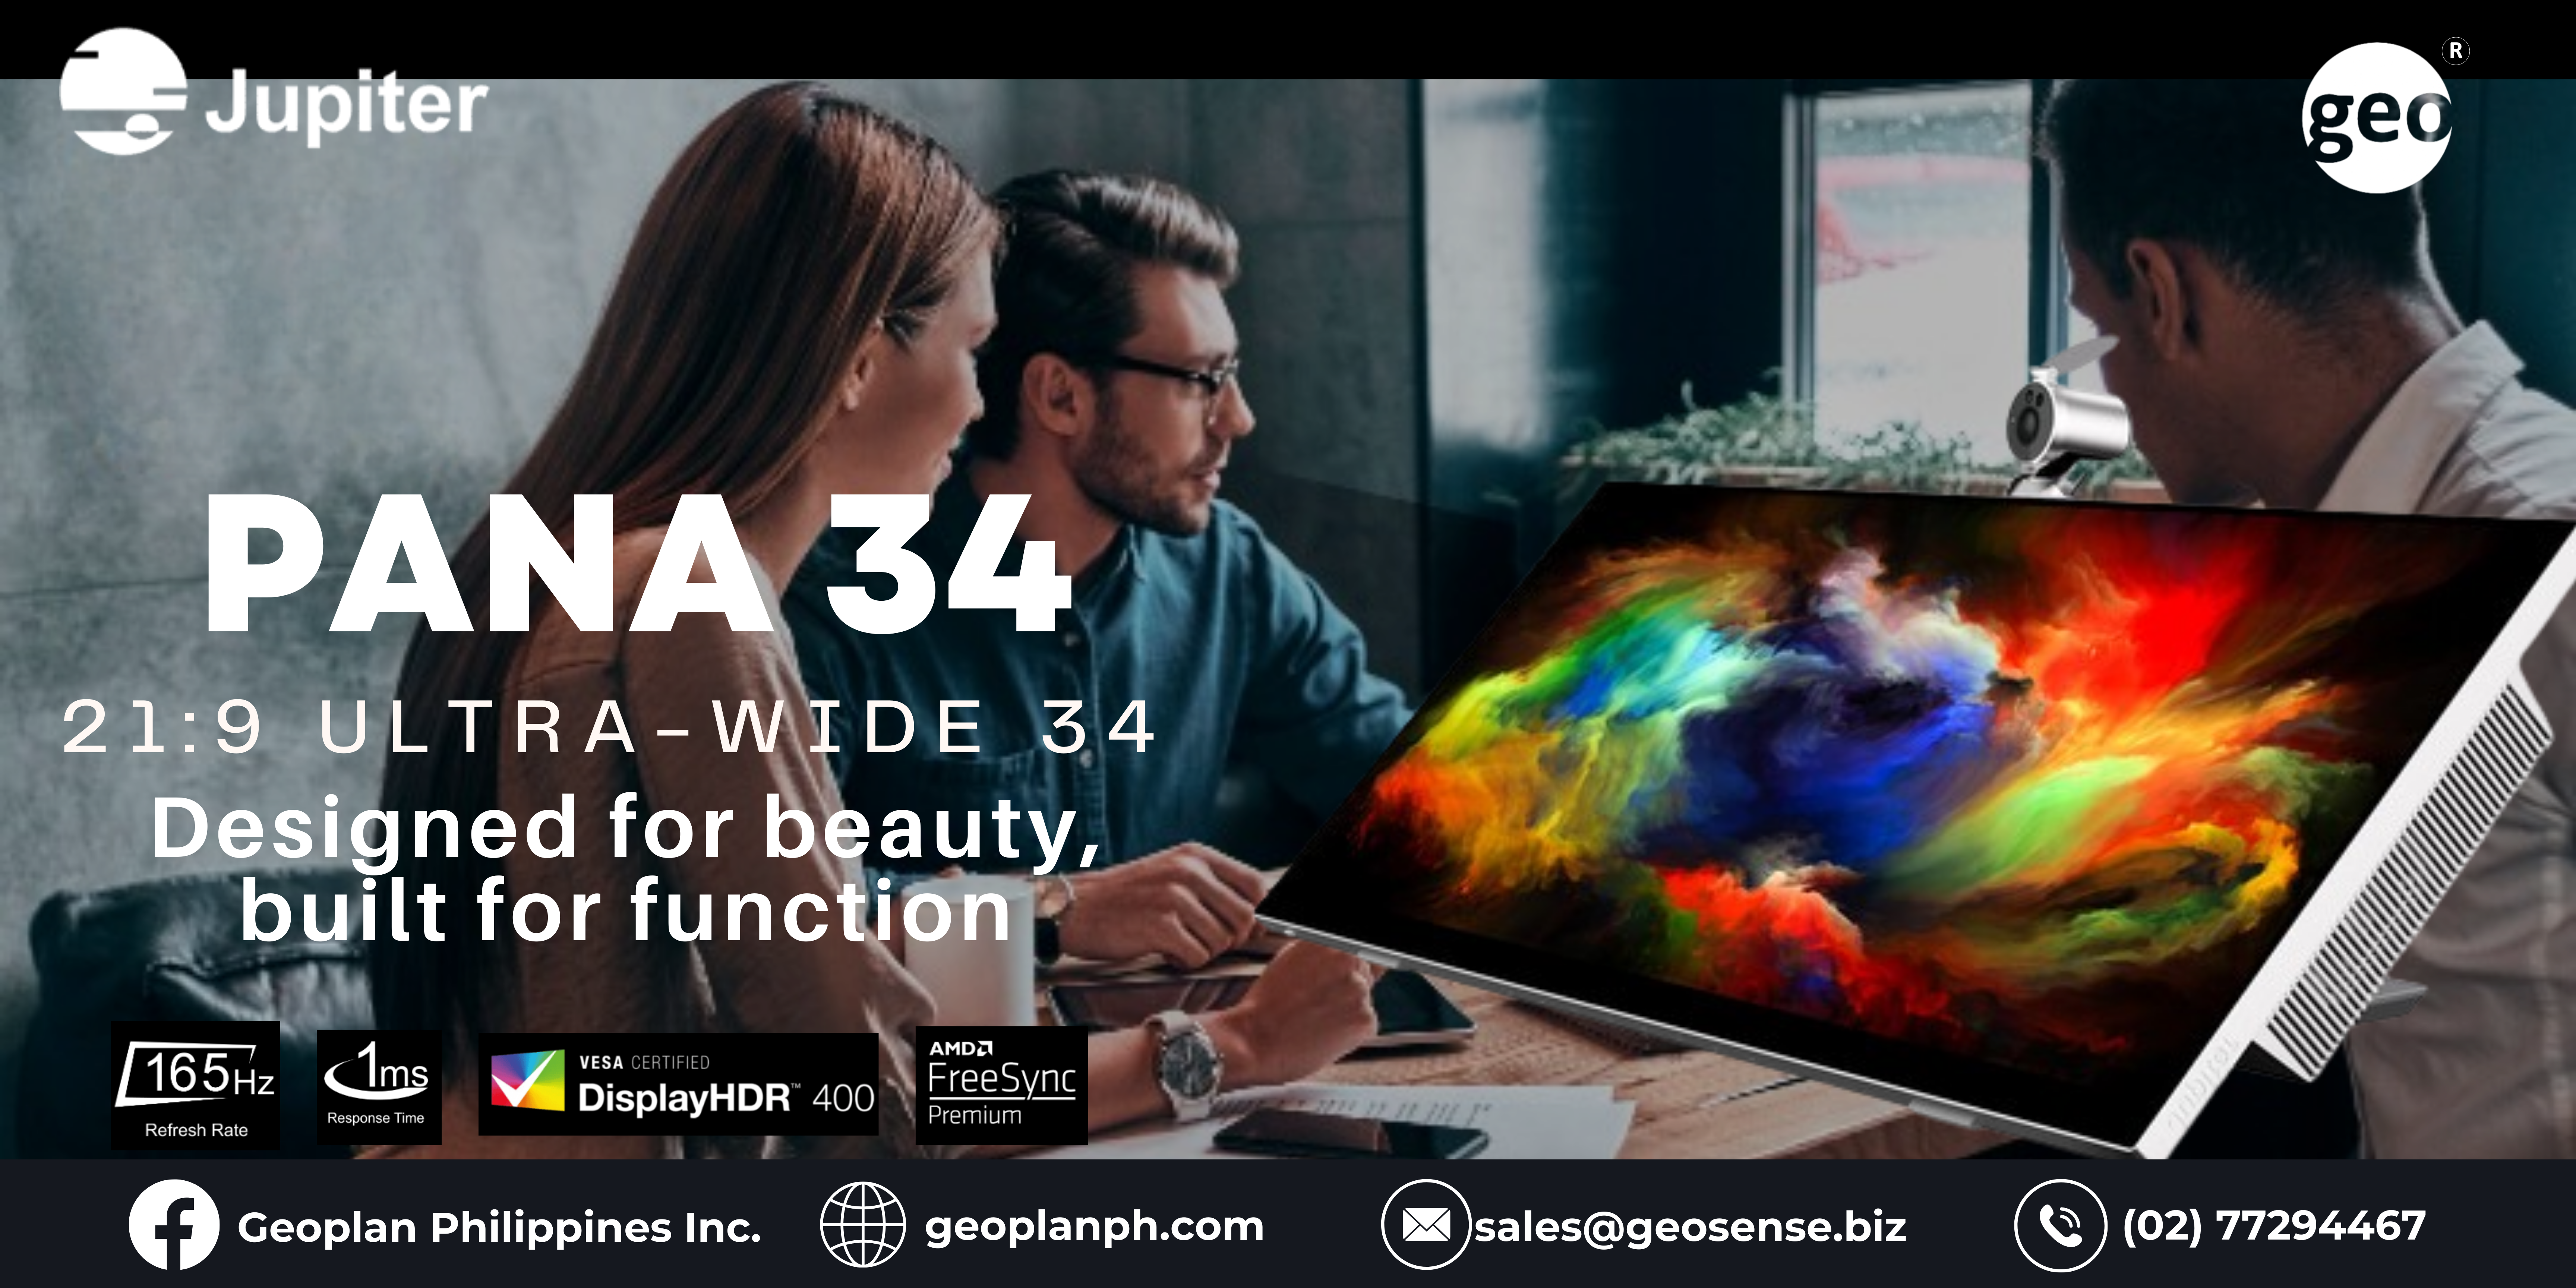 Jupiter: Pana 34 21:9 LCD the Ultimate Canvas for Creative Innovation